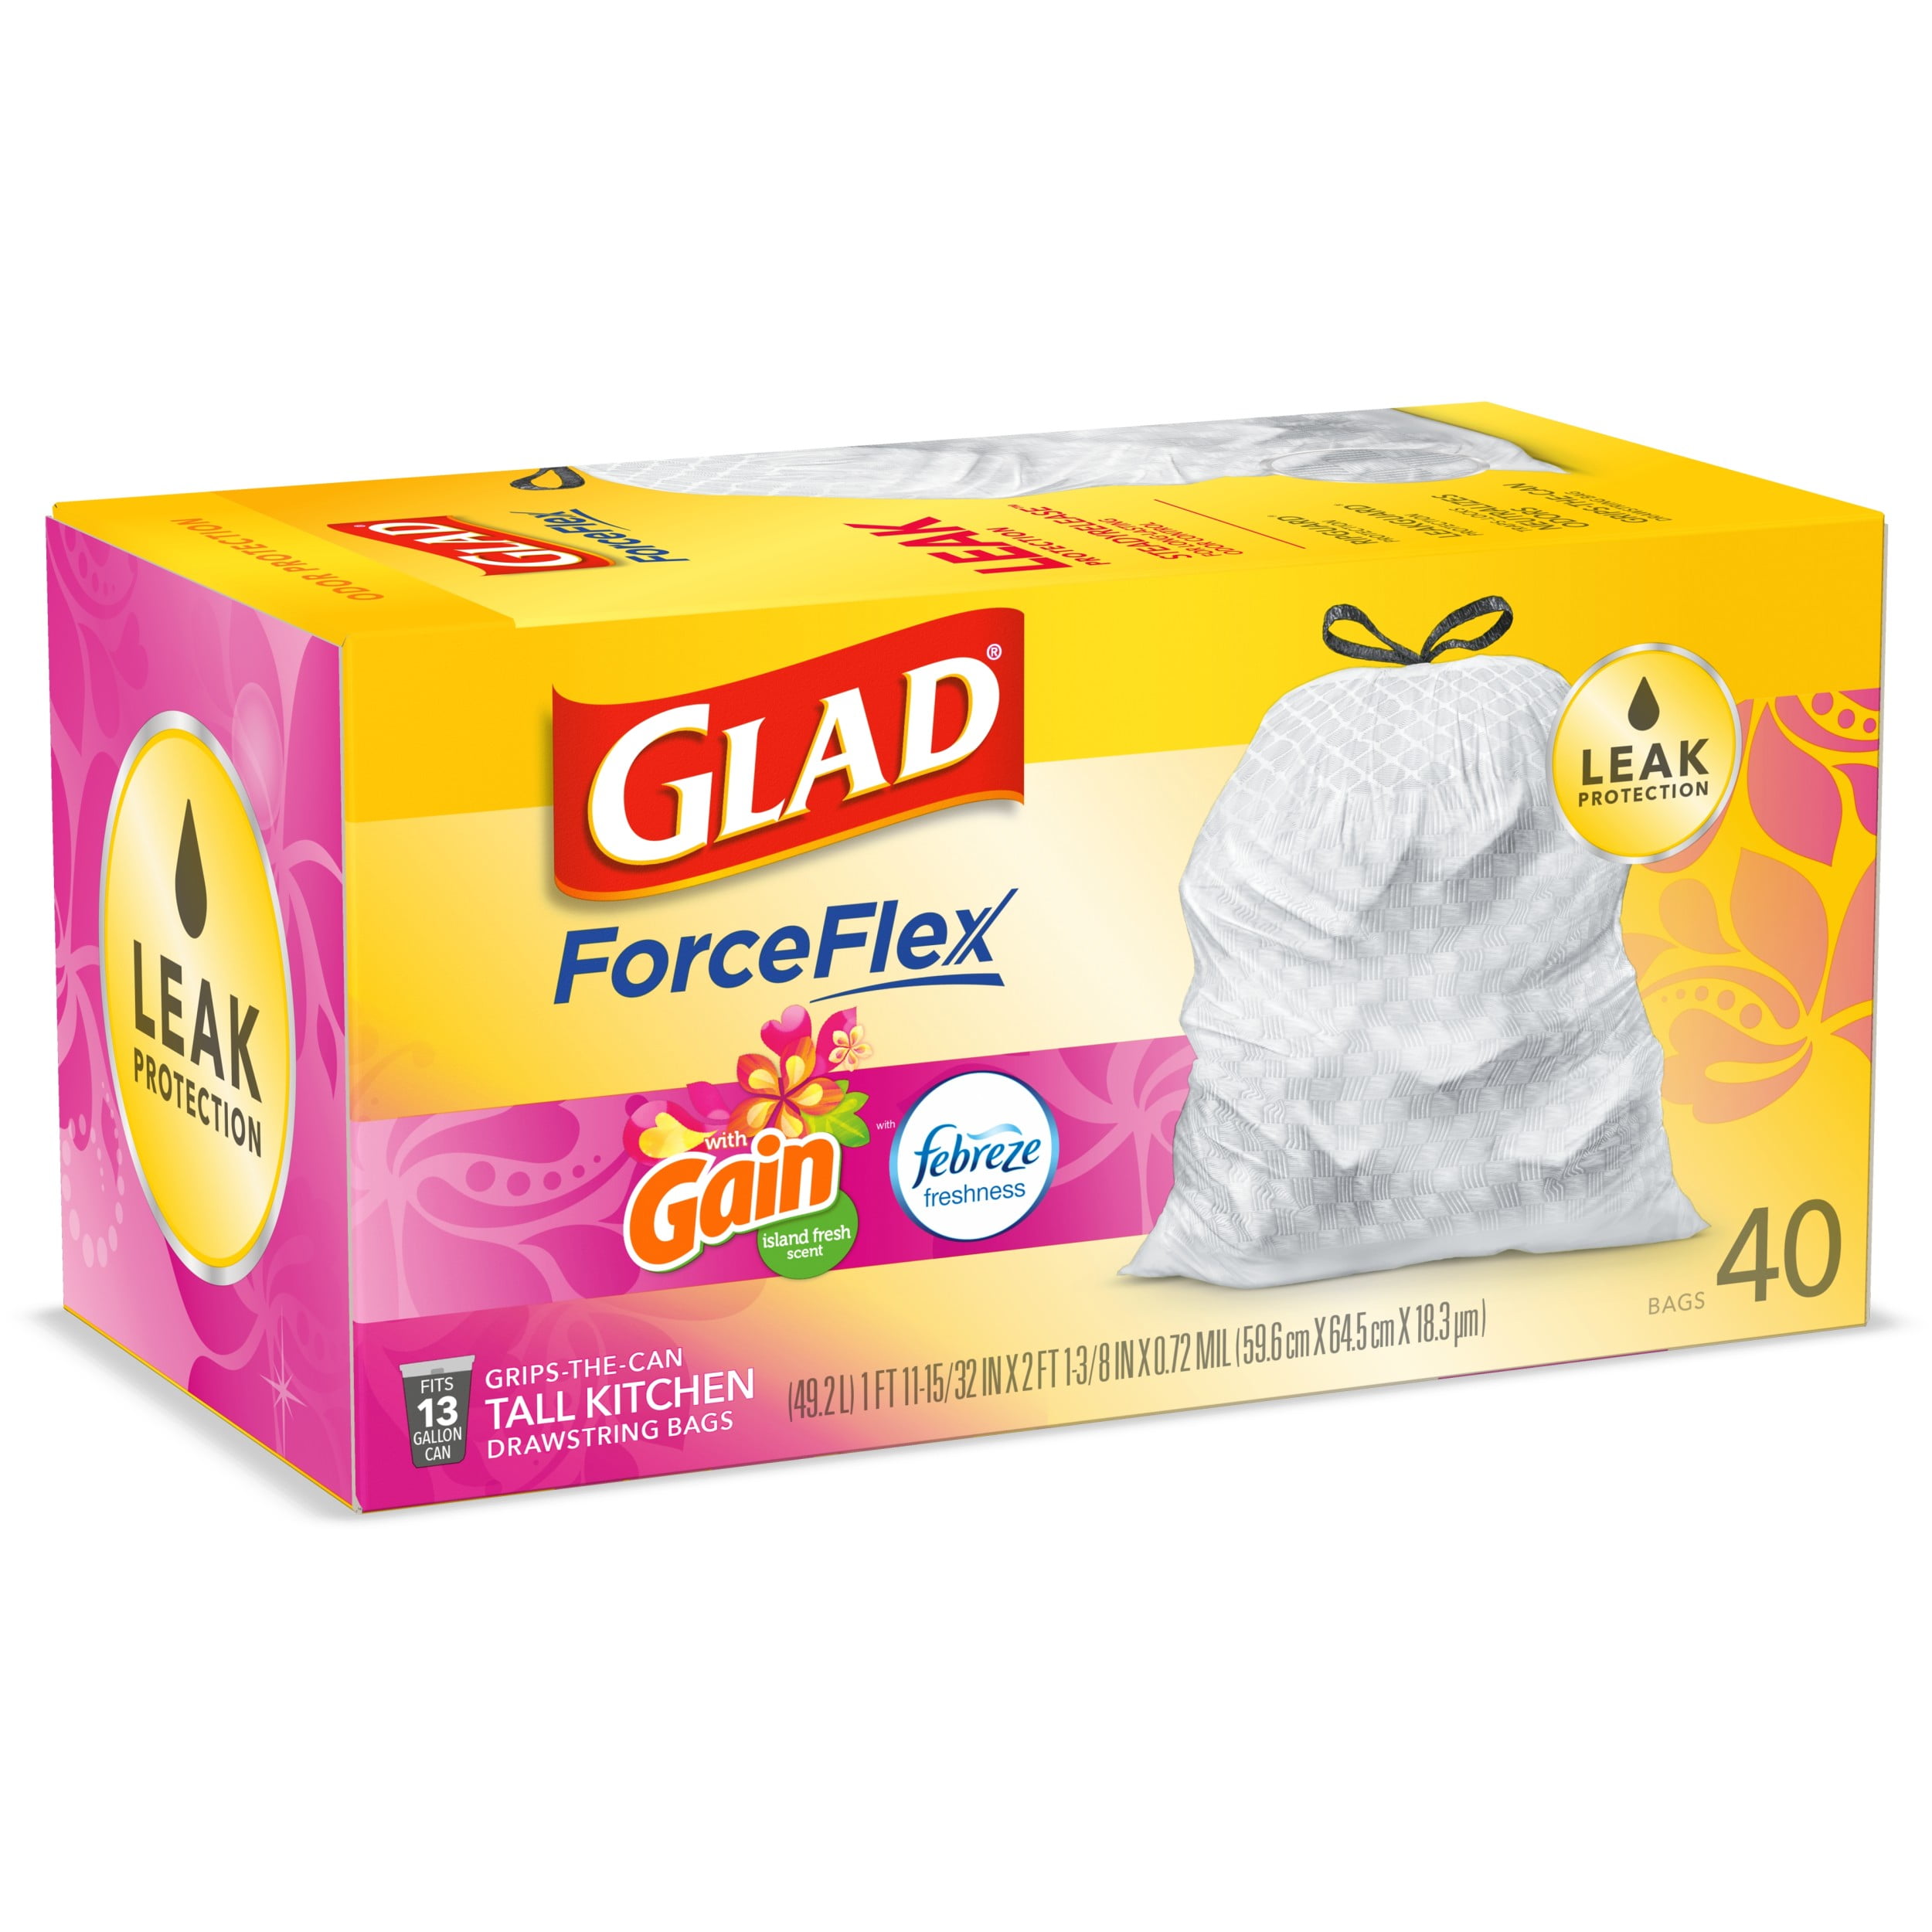 Glad ForceFlex with Febreze Gain Original Scent Tall Kitchen Drawstring Trash  Bags, 40 ct - Smith's Food and Drug